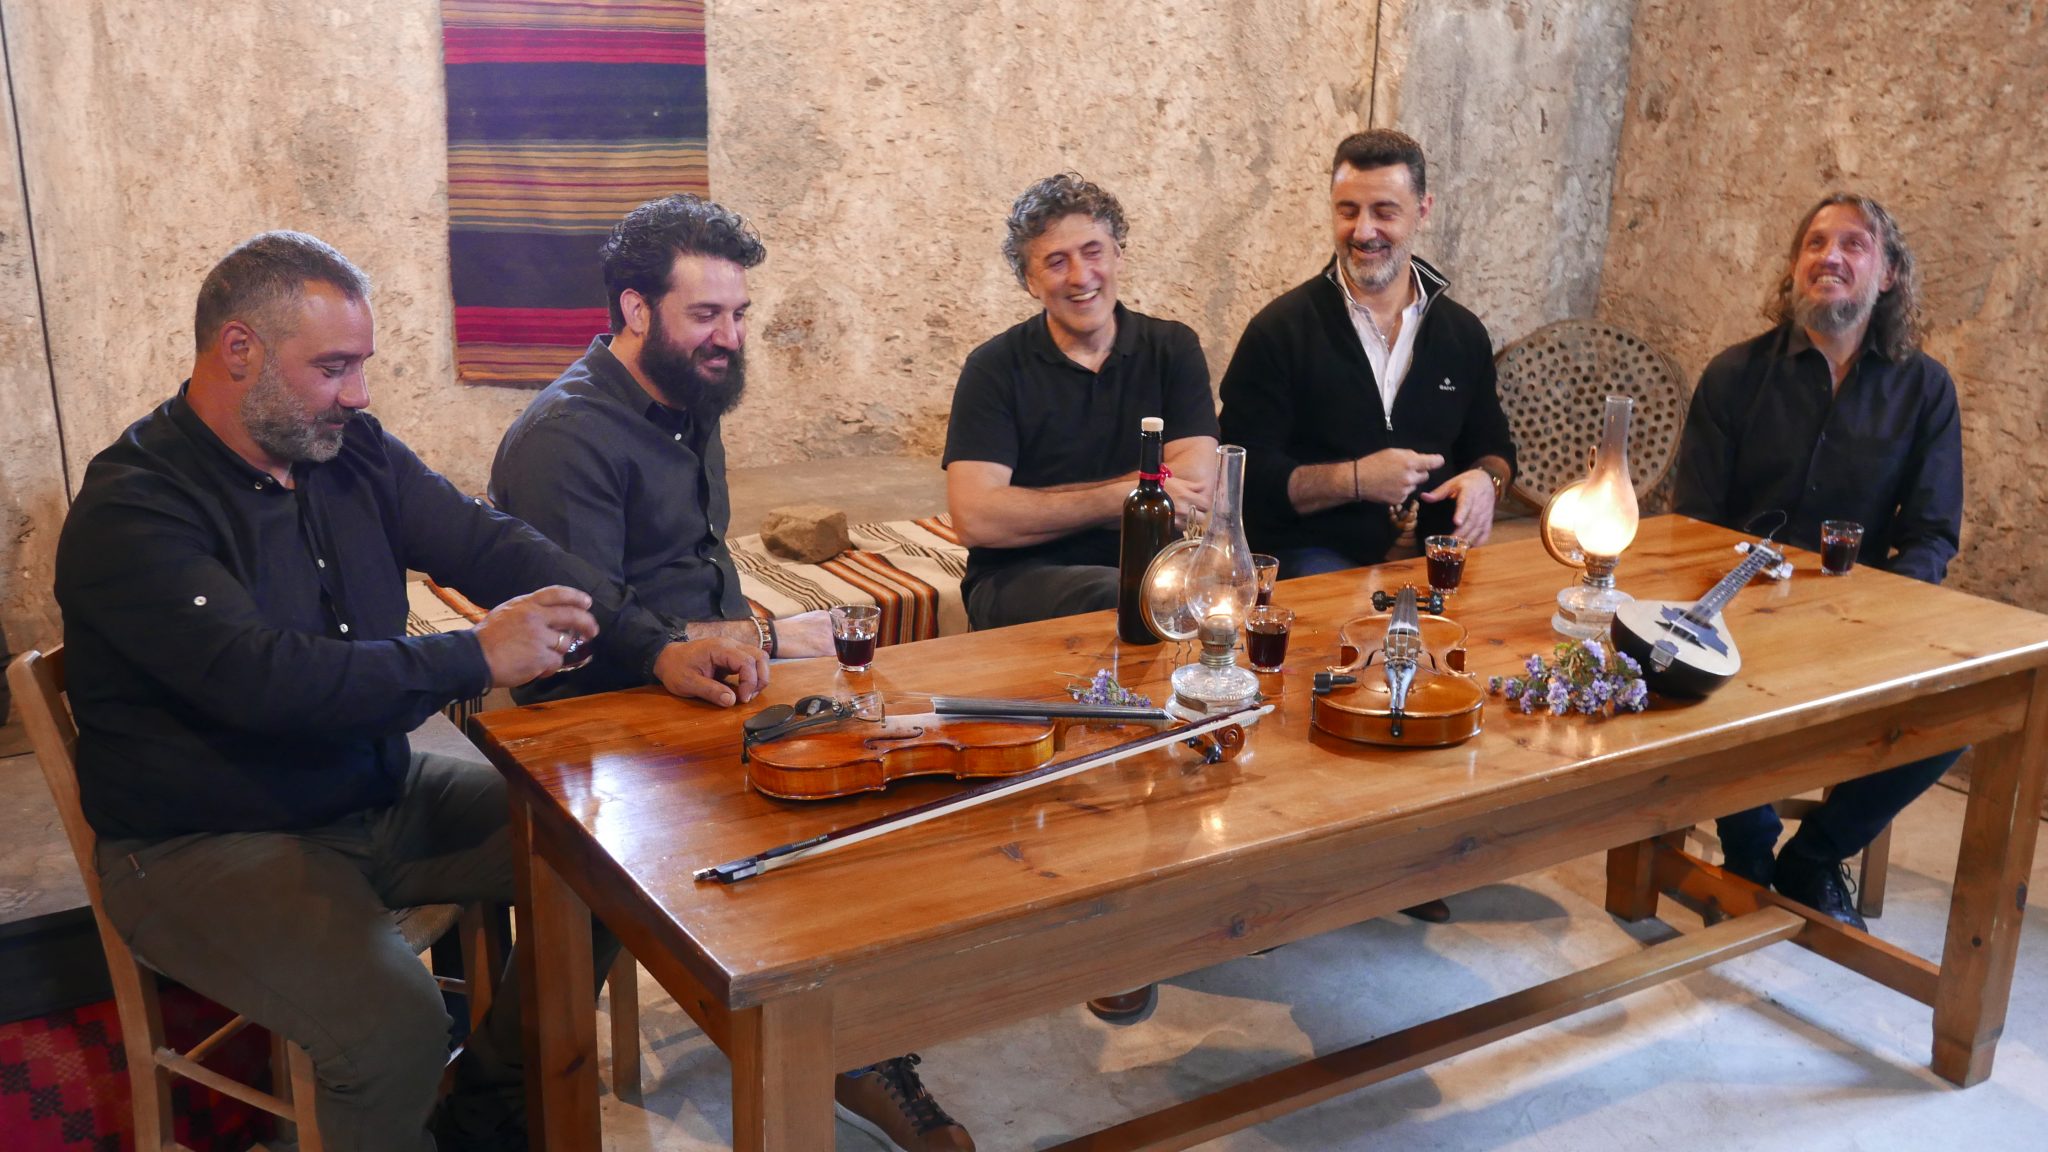 Vlatos Jazz CD release with the greatest violins of Western Crete - Bows of Kissamos. All songs are recorded live in Vlatos